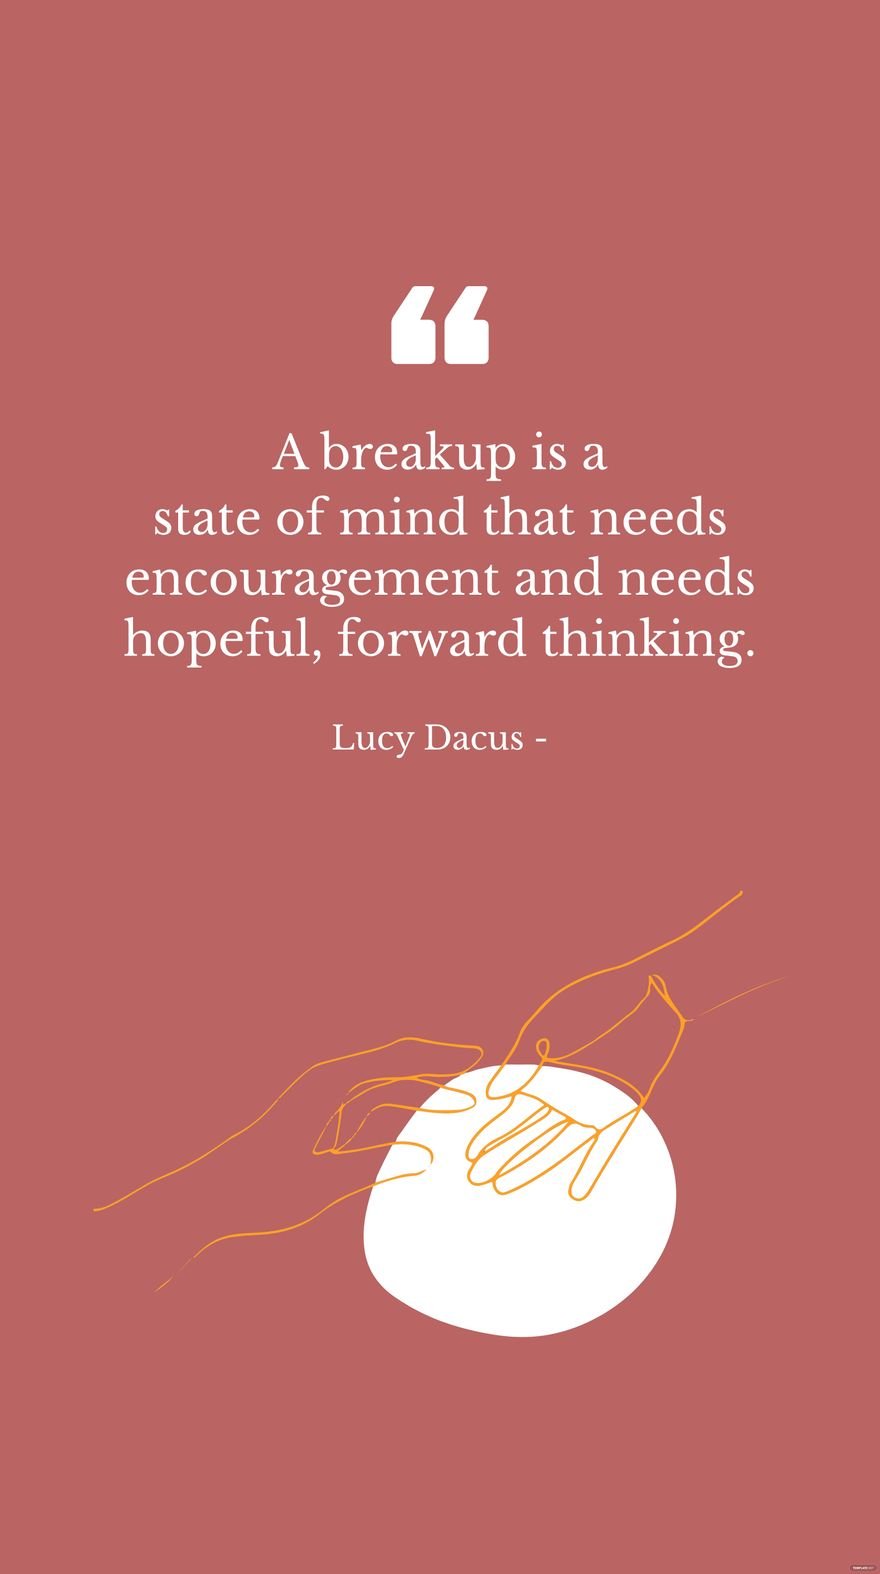 Lucy Dacus - A breakup is a state of mind that needs encouragement and needs hopeful, forward thinking.